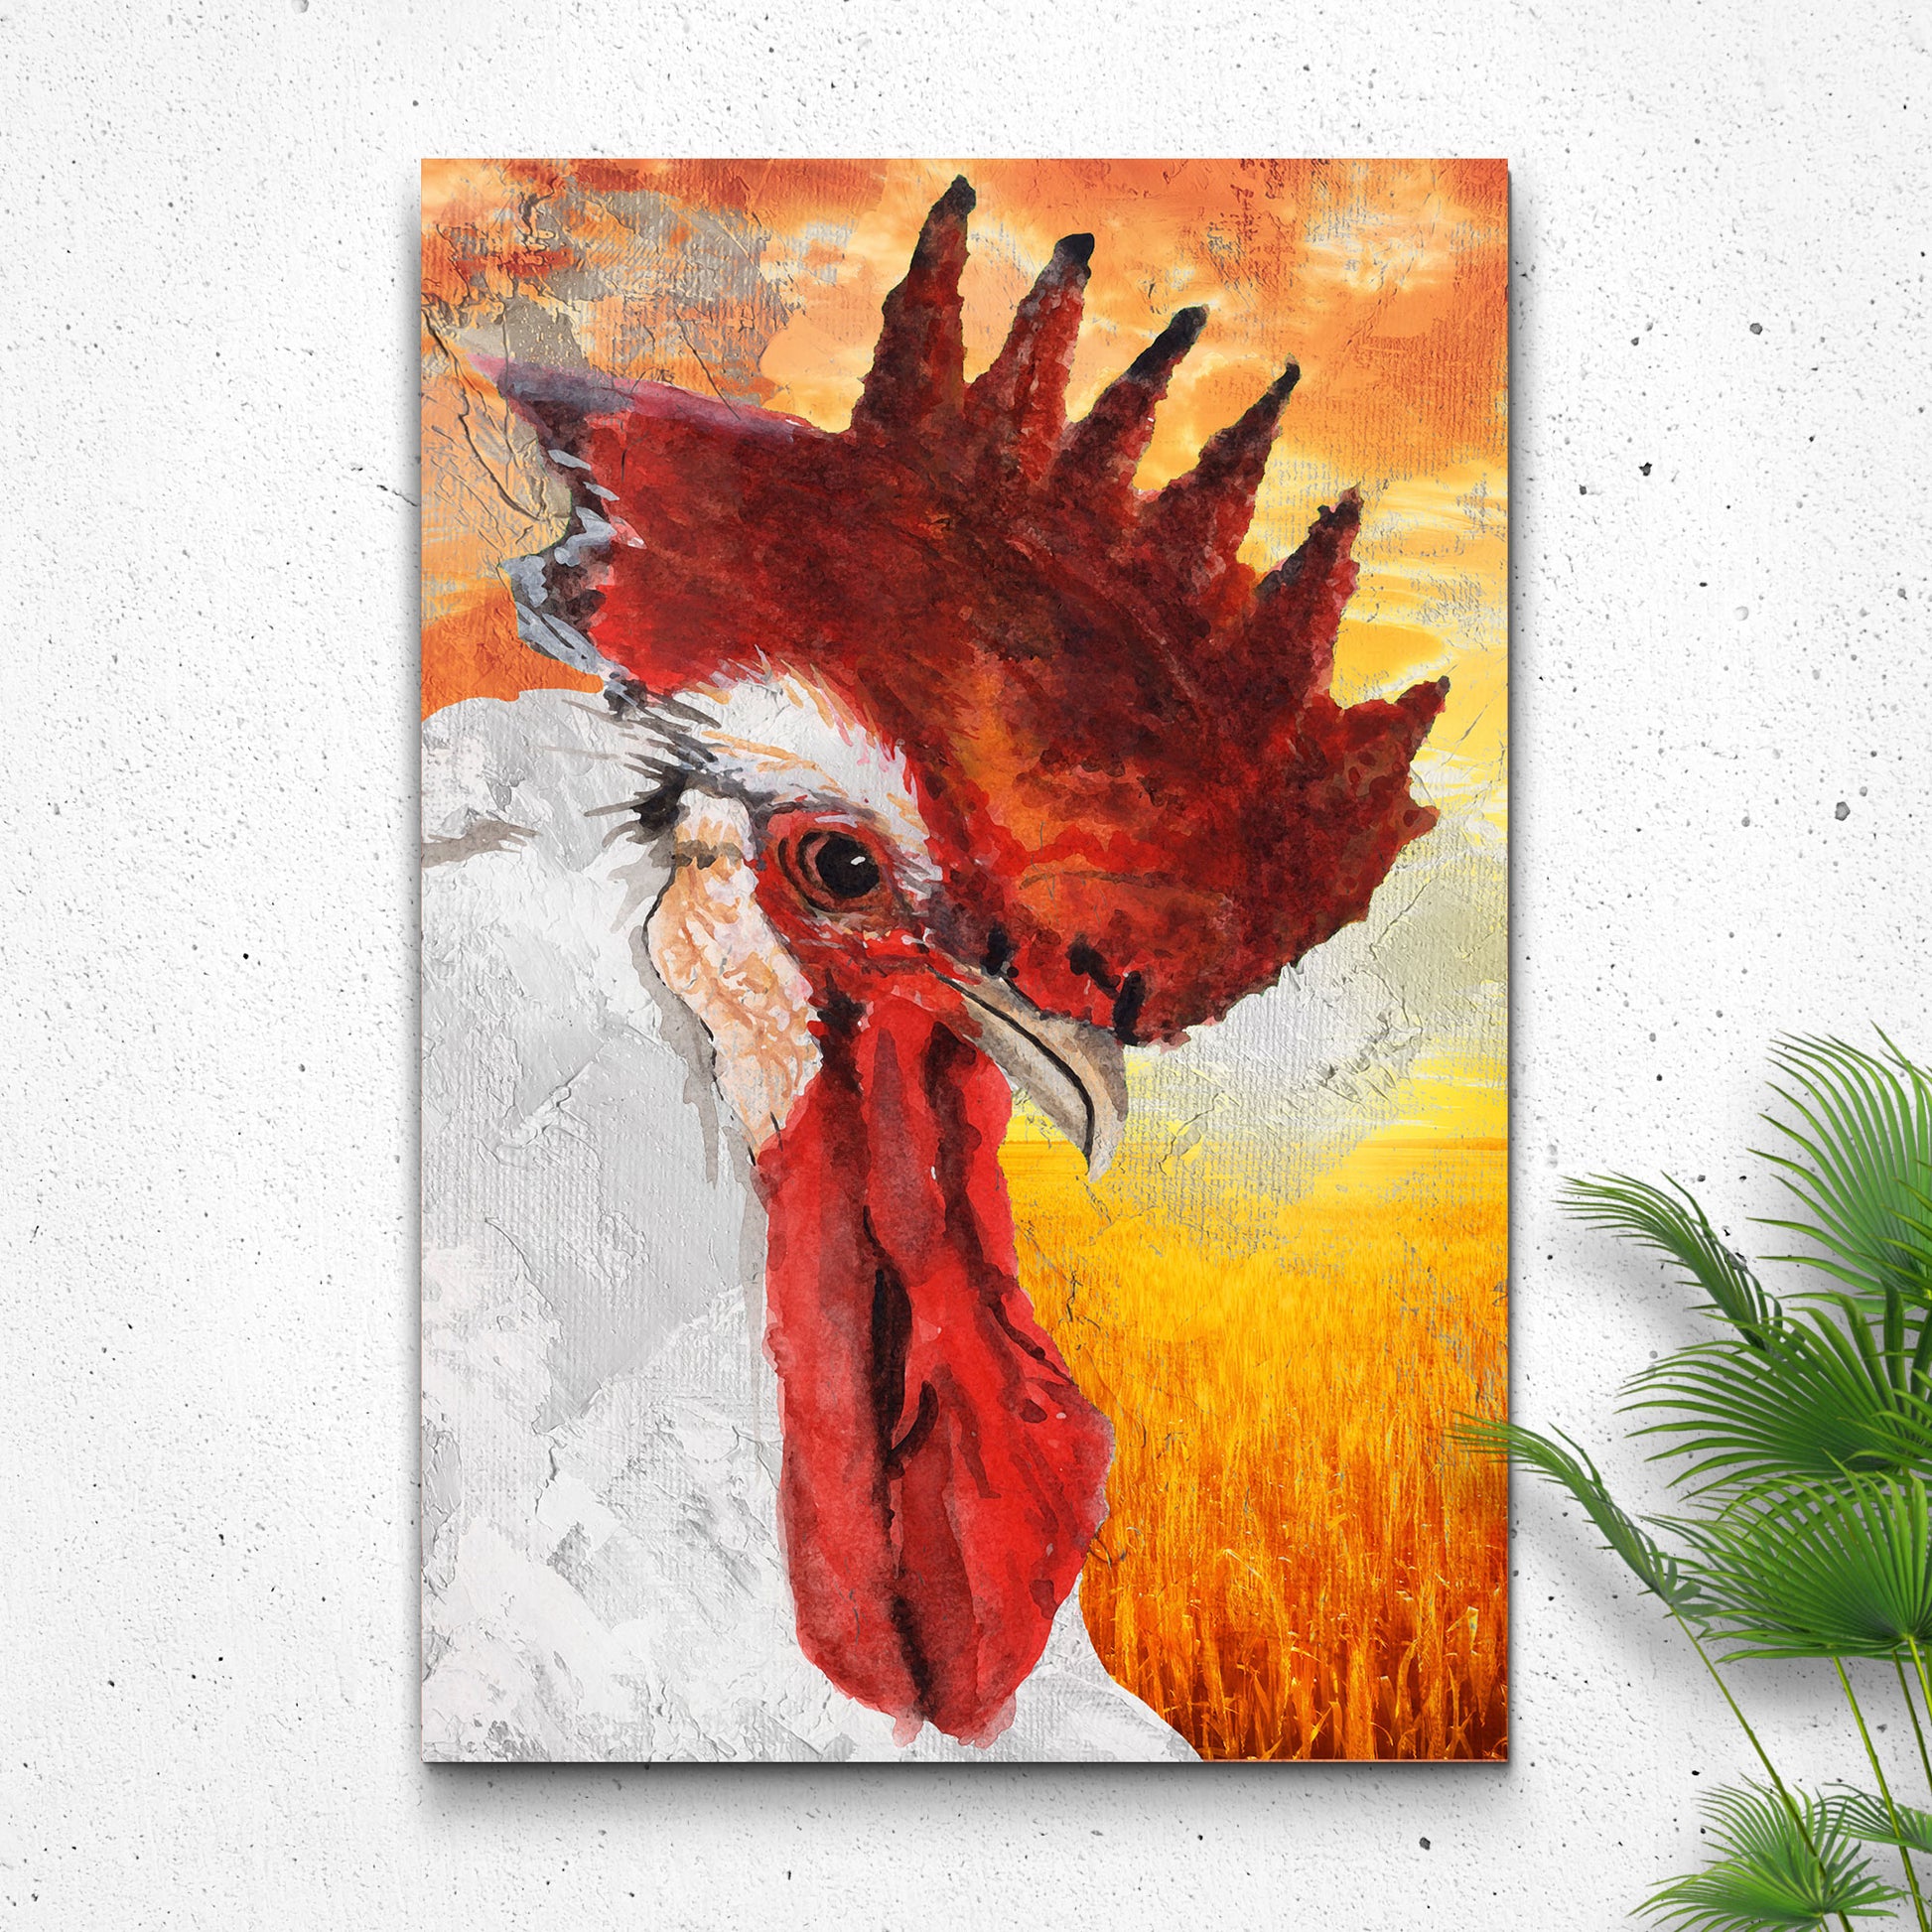 Farm White Rooster Canvas Wall Art - Image by Tailored Canvases